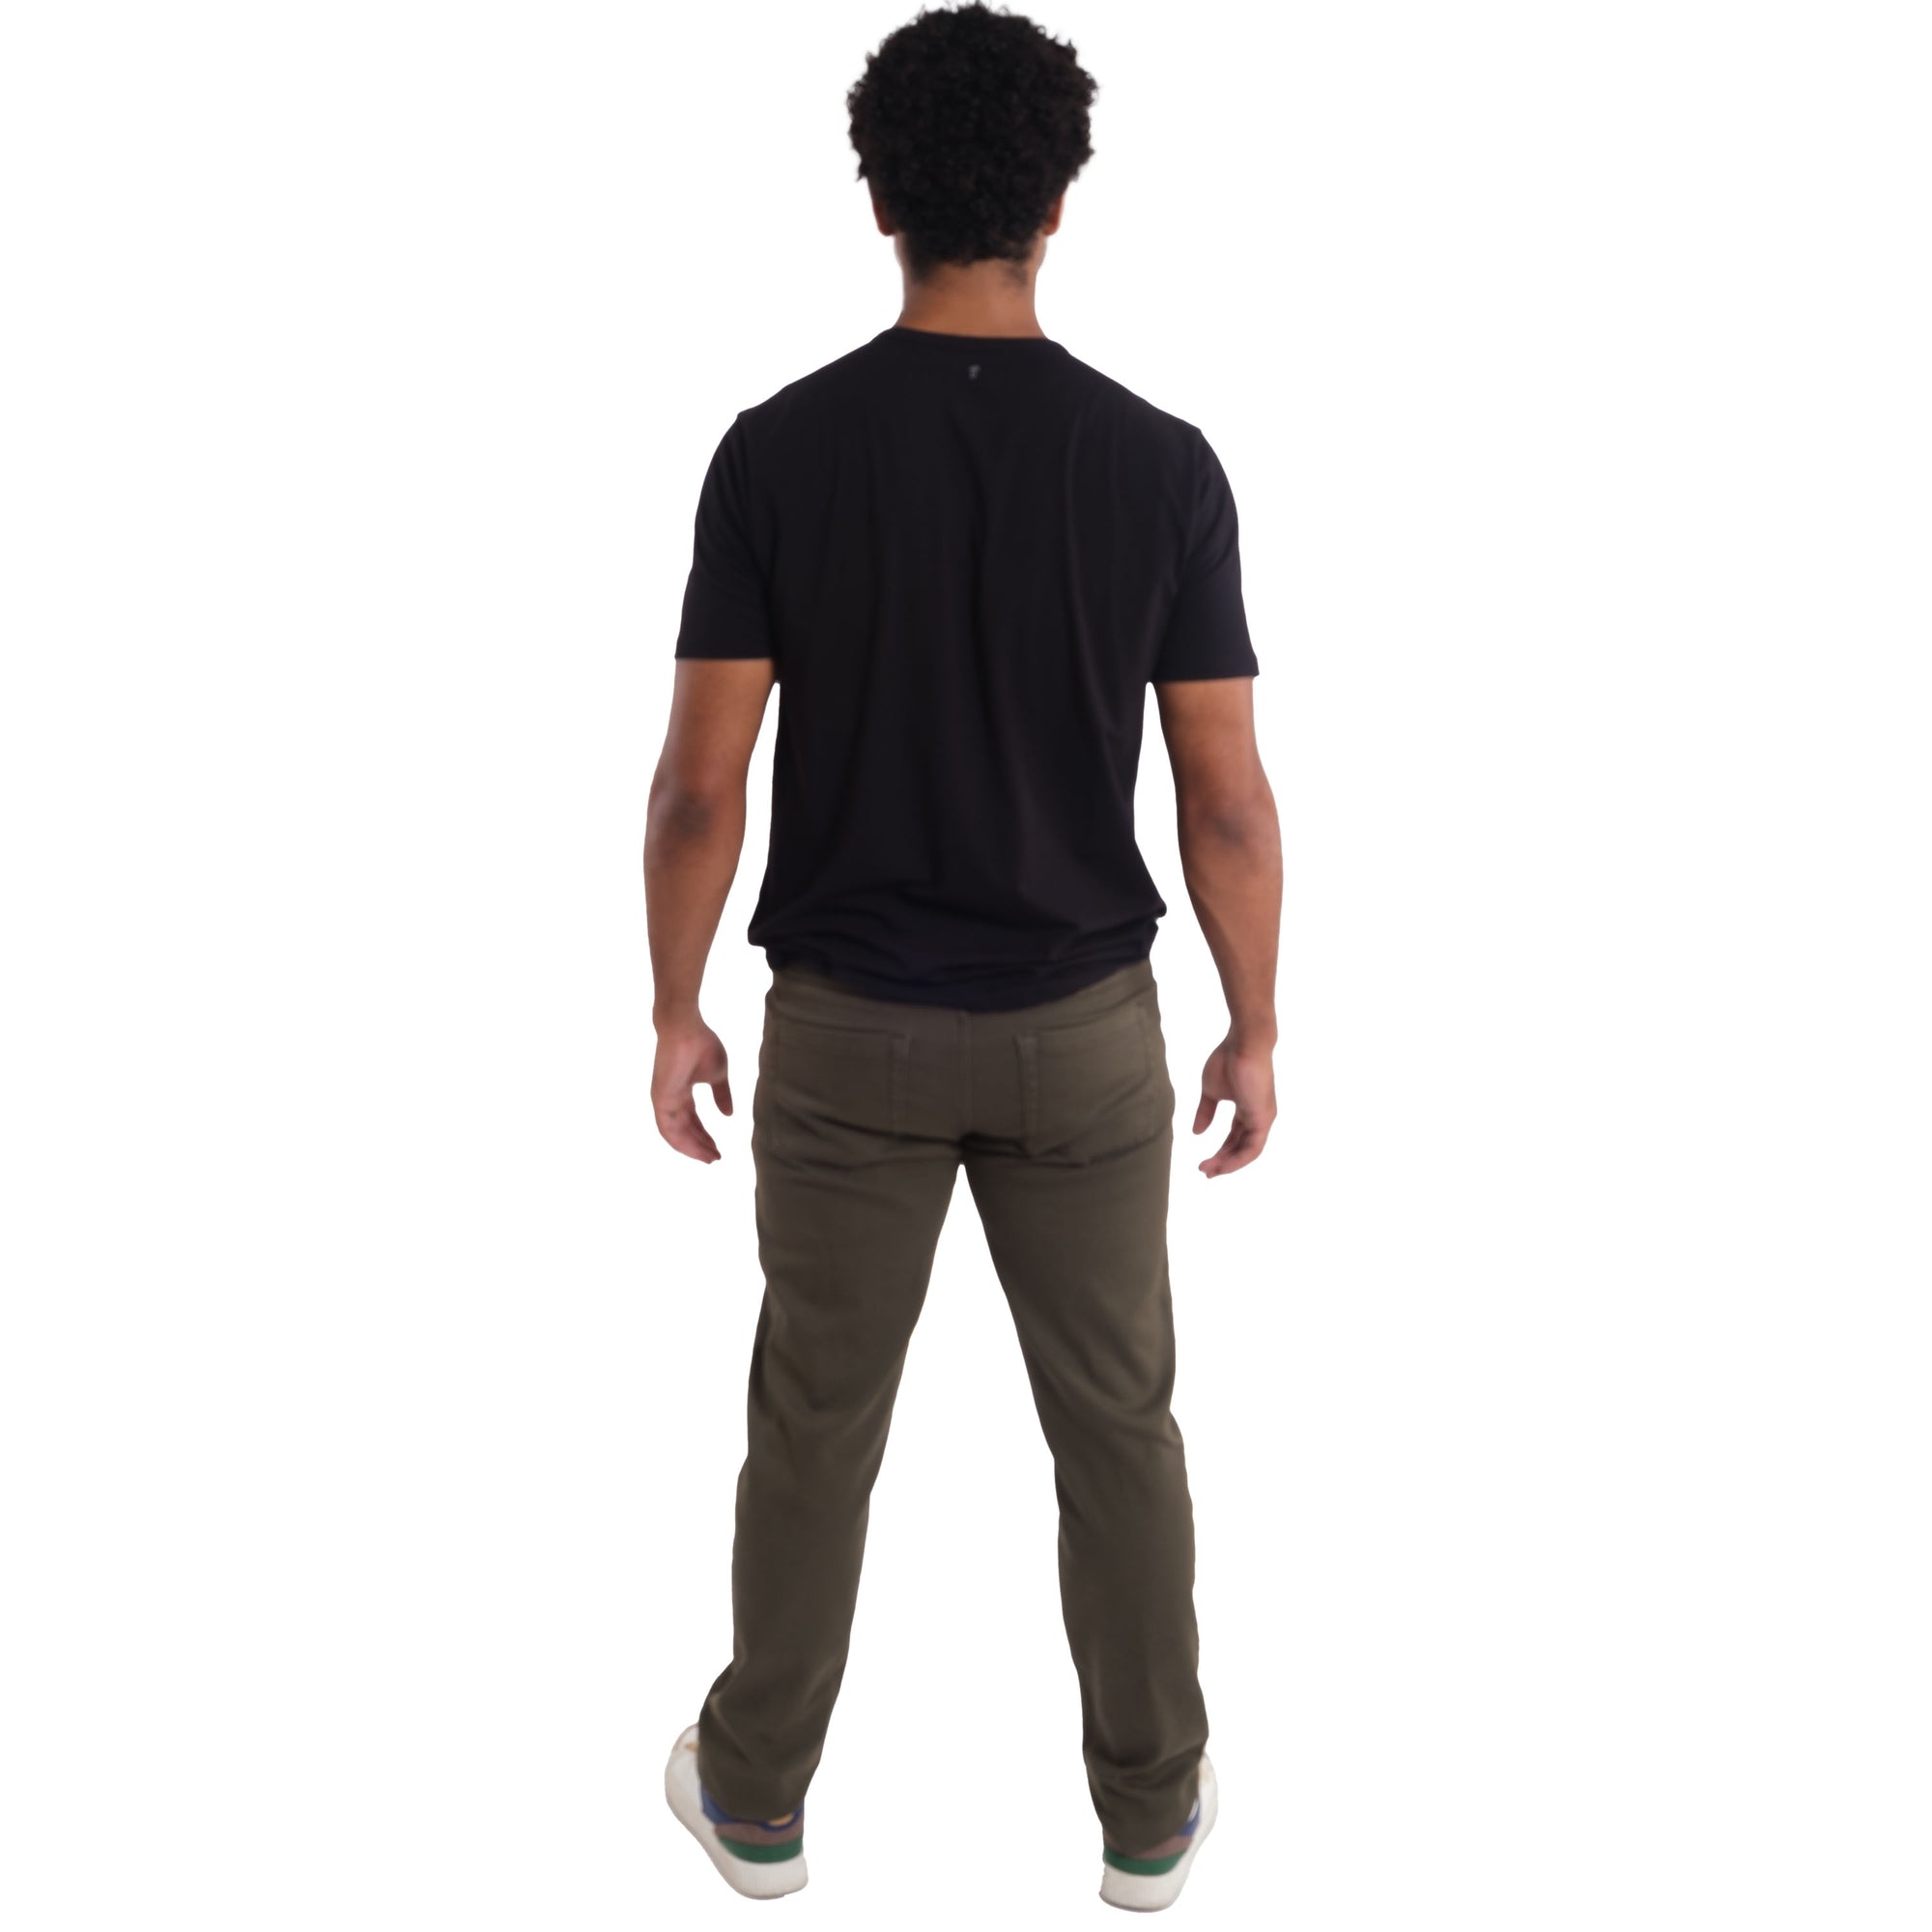 Athletic Fit / Soldier (Olive)